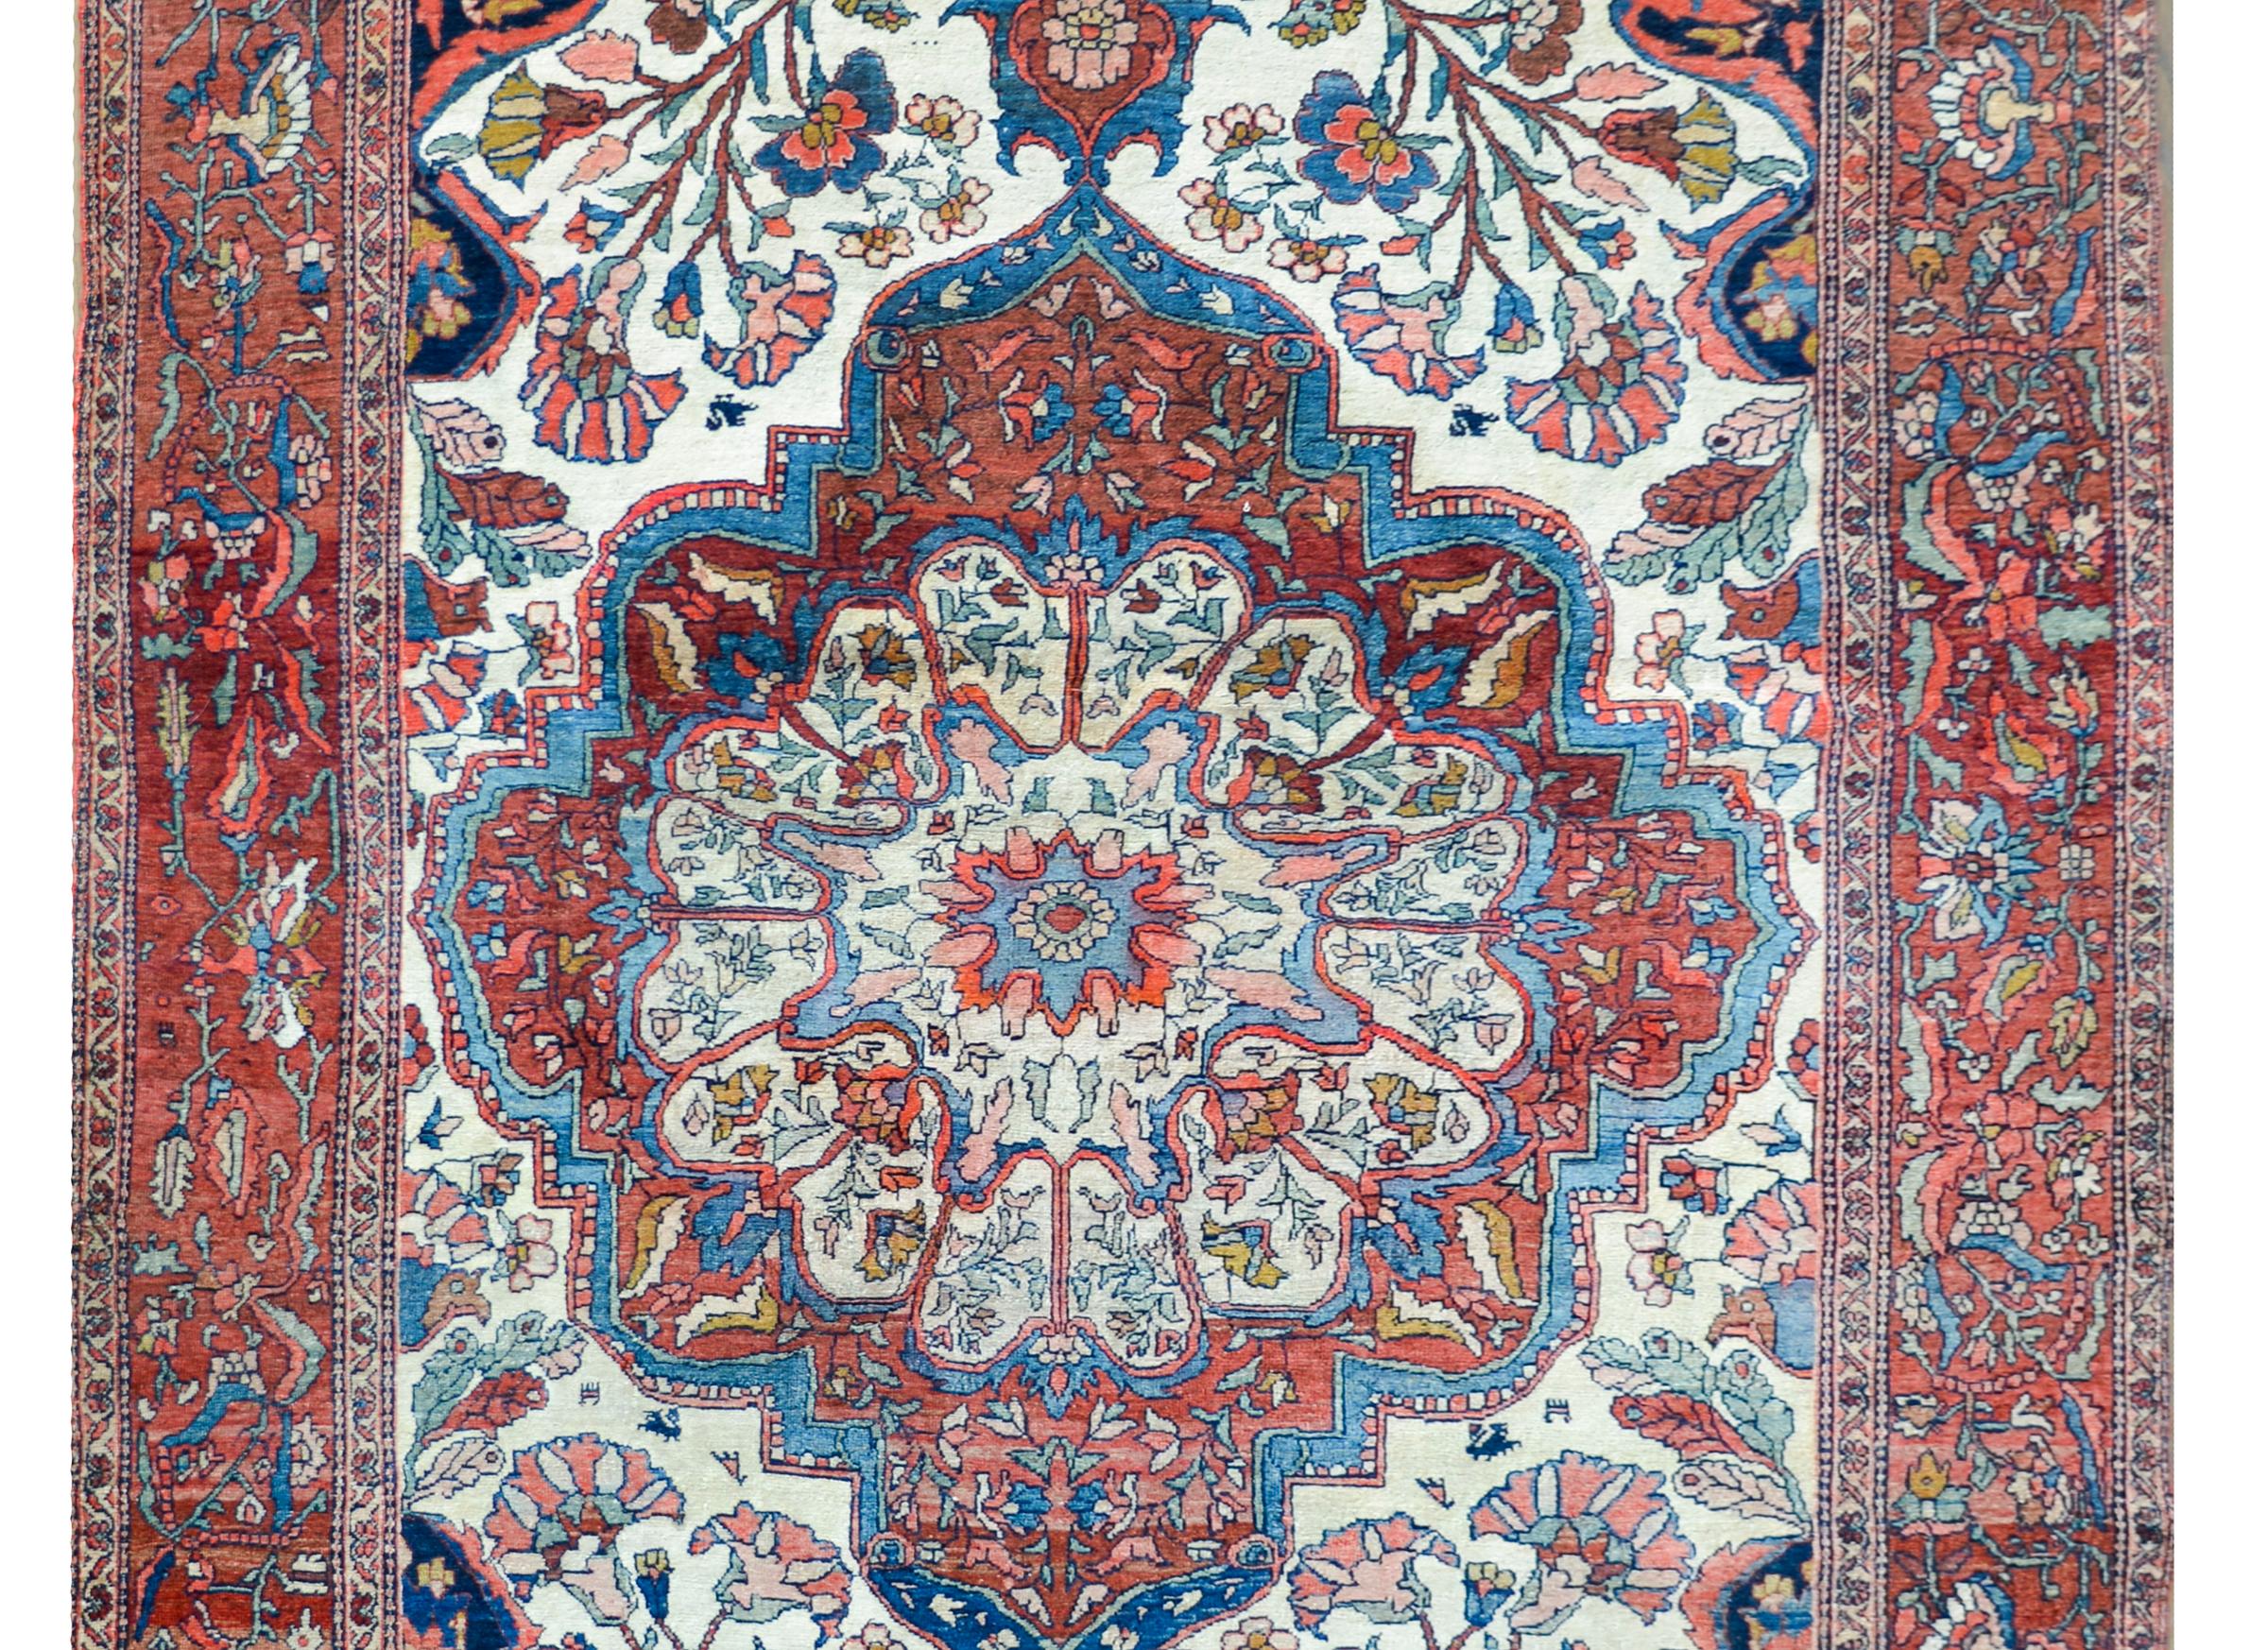 A stunning early 20th century Persian Sarouk Farahan rug with a large central floral medallion woven in incredible reds, pinks, oranges, and indigos, and set against a white field with mirrored floral clusters all woven in similar colors as the